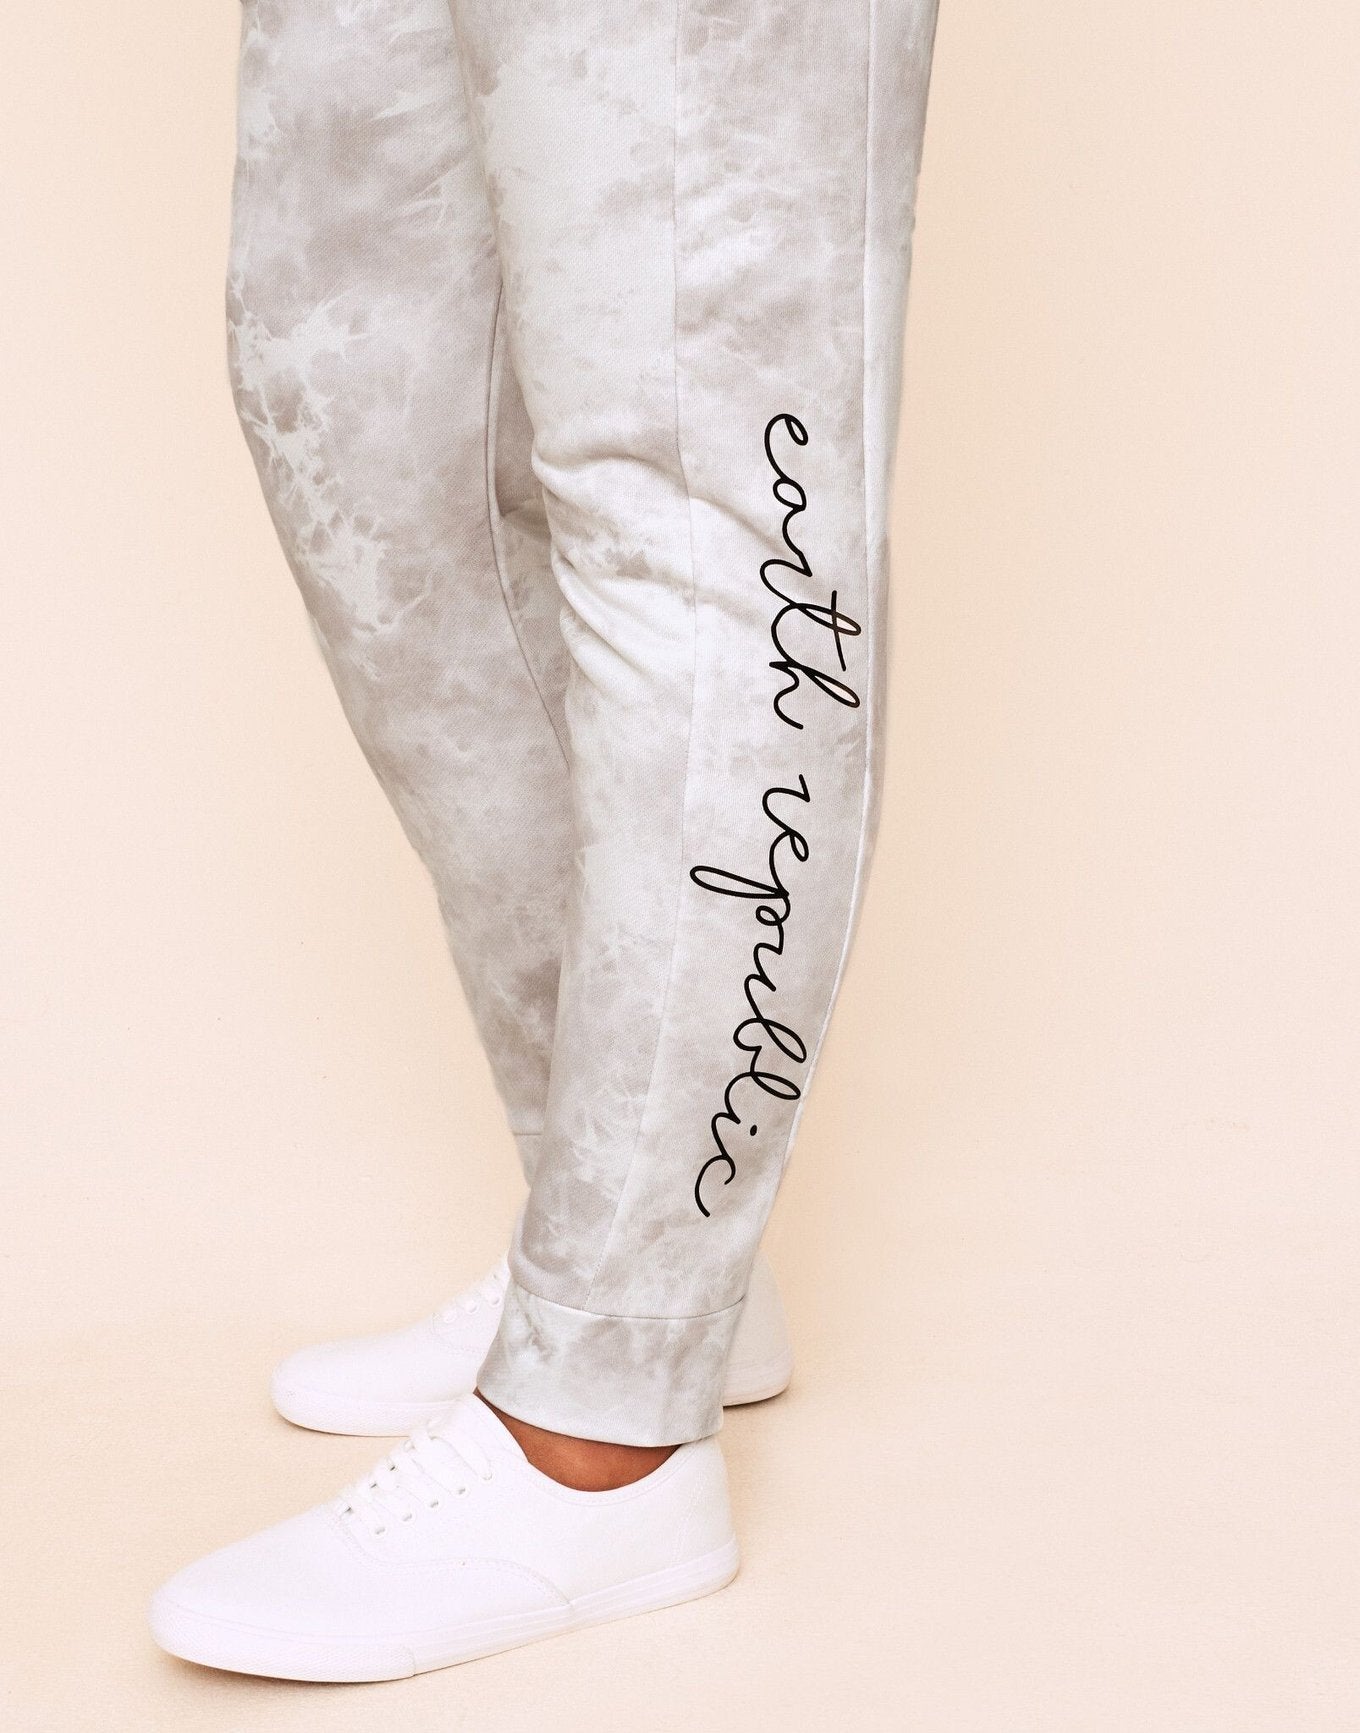 Earth Republic Shawn Jogger Pant Joggers in color Tea Stain Print and shape jogger